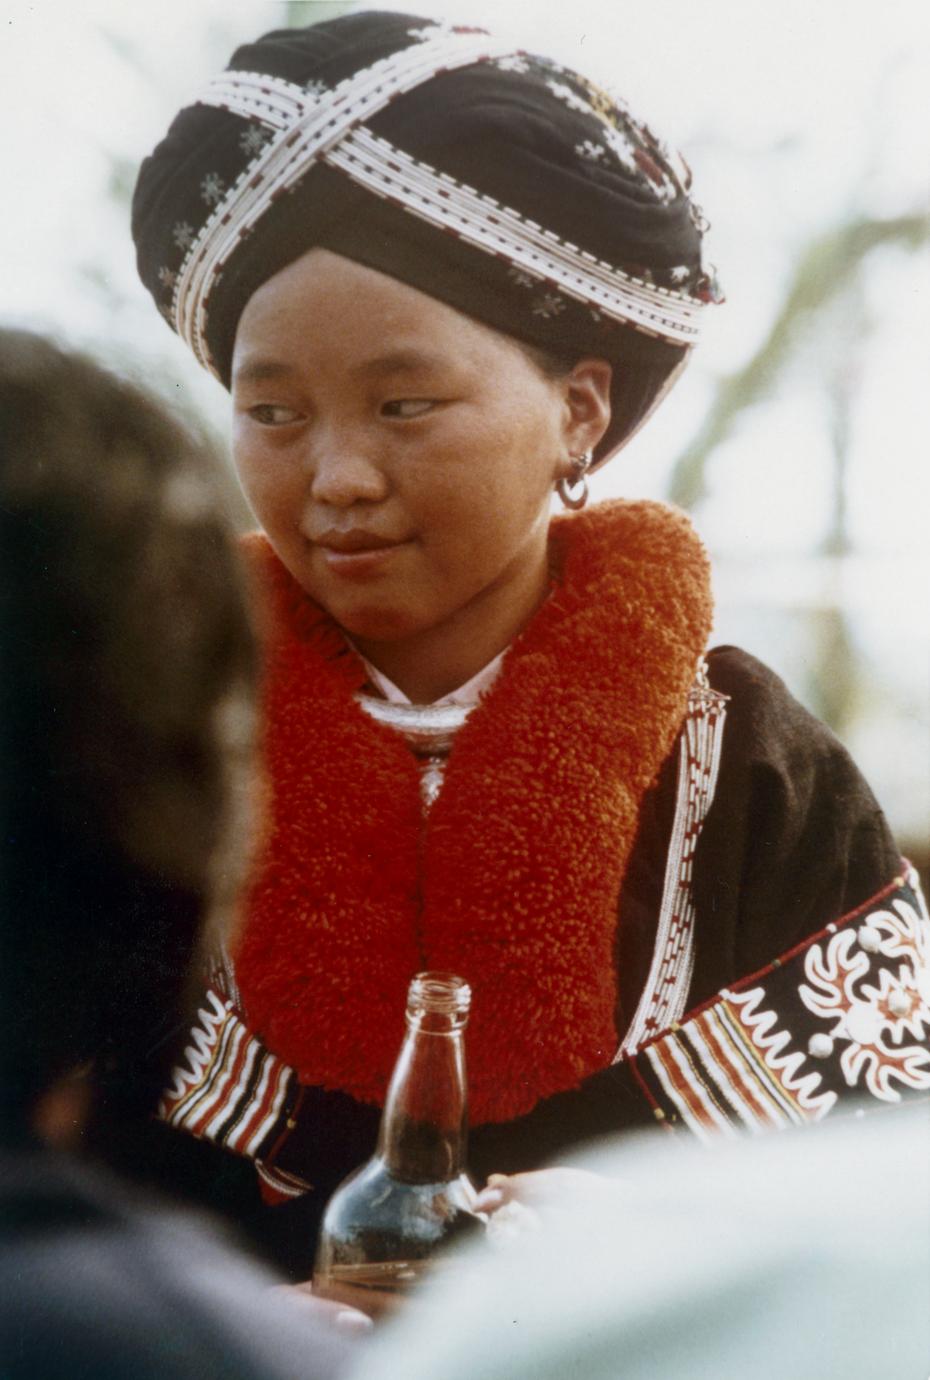 A Yao (Iu Mien) girl at the town of Nam Kheung in Houa Khong Province